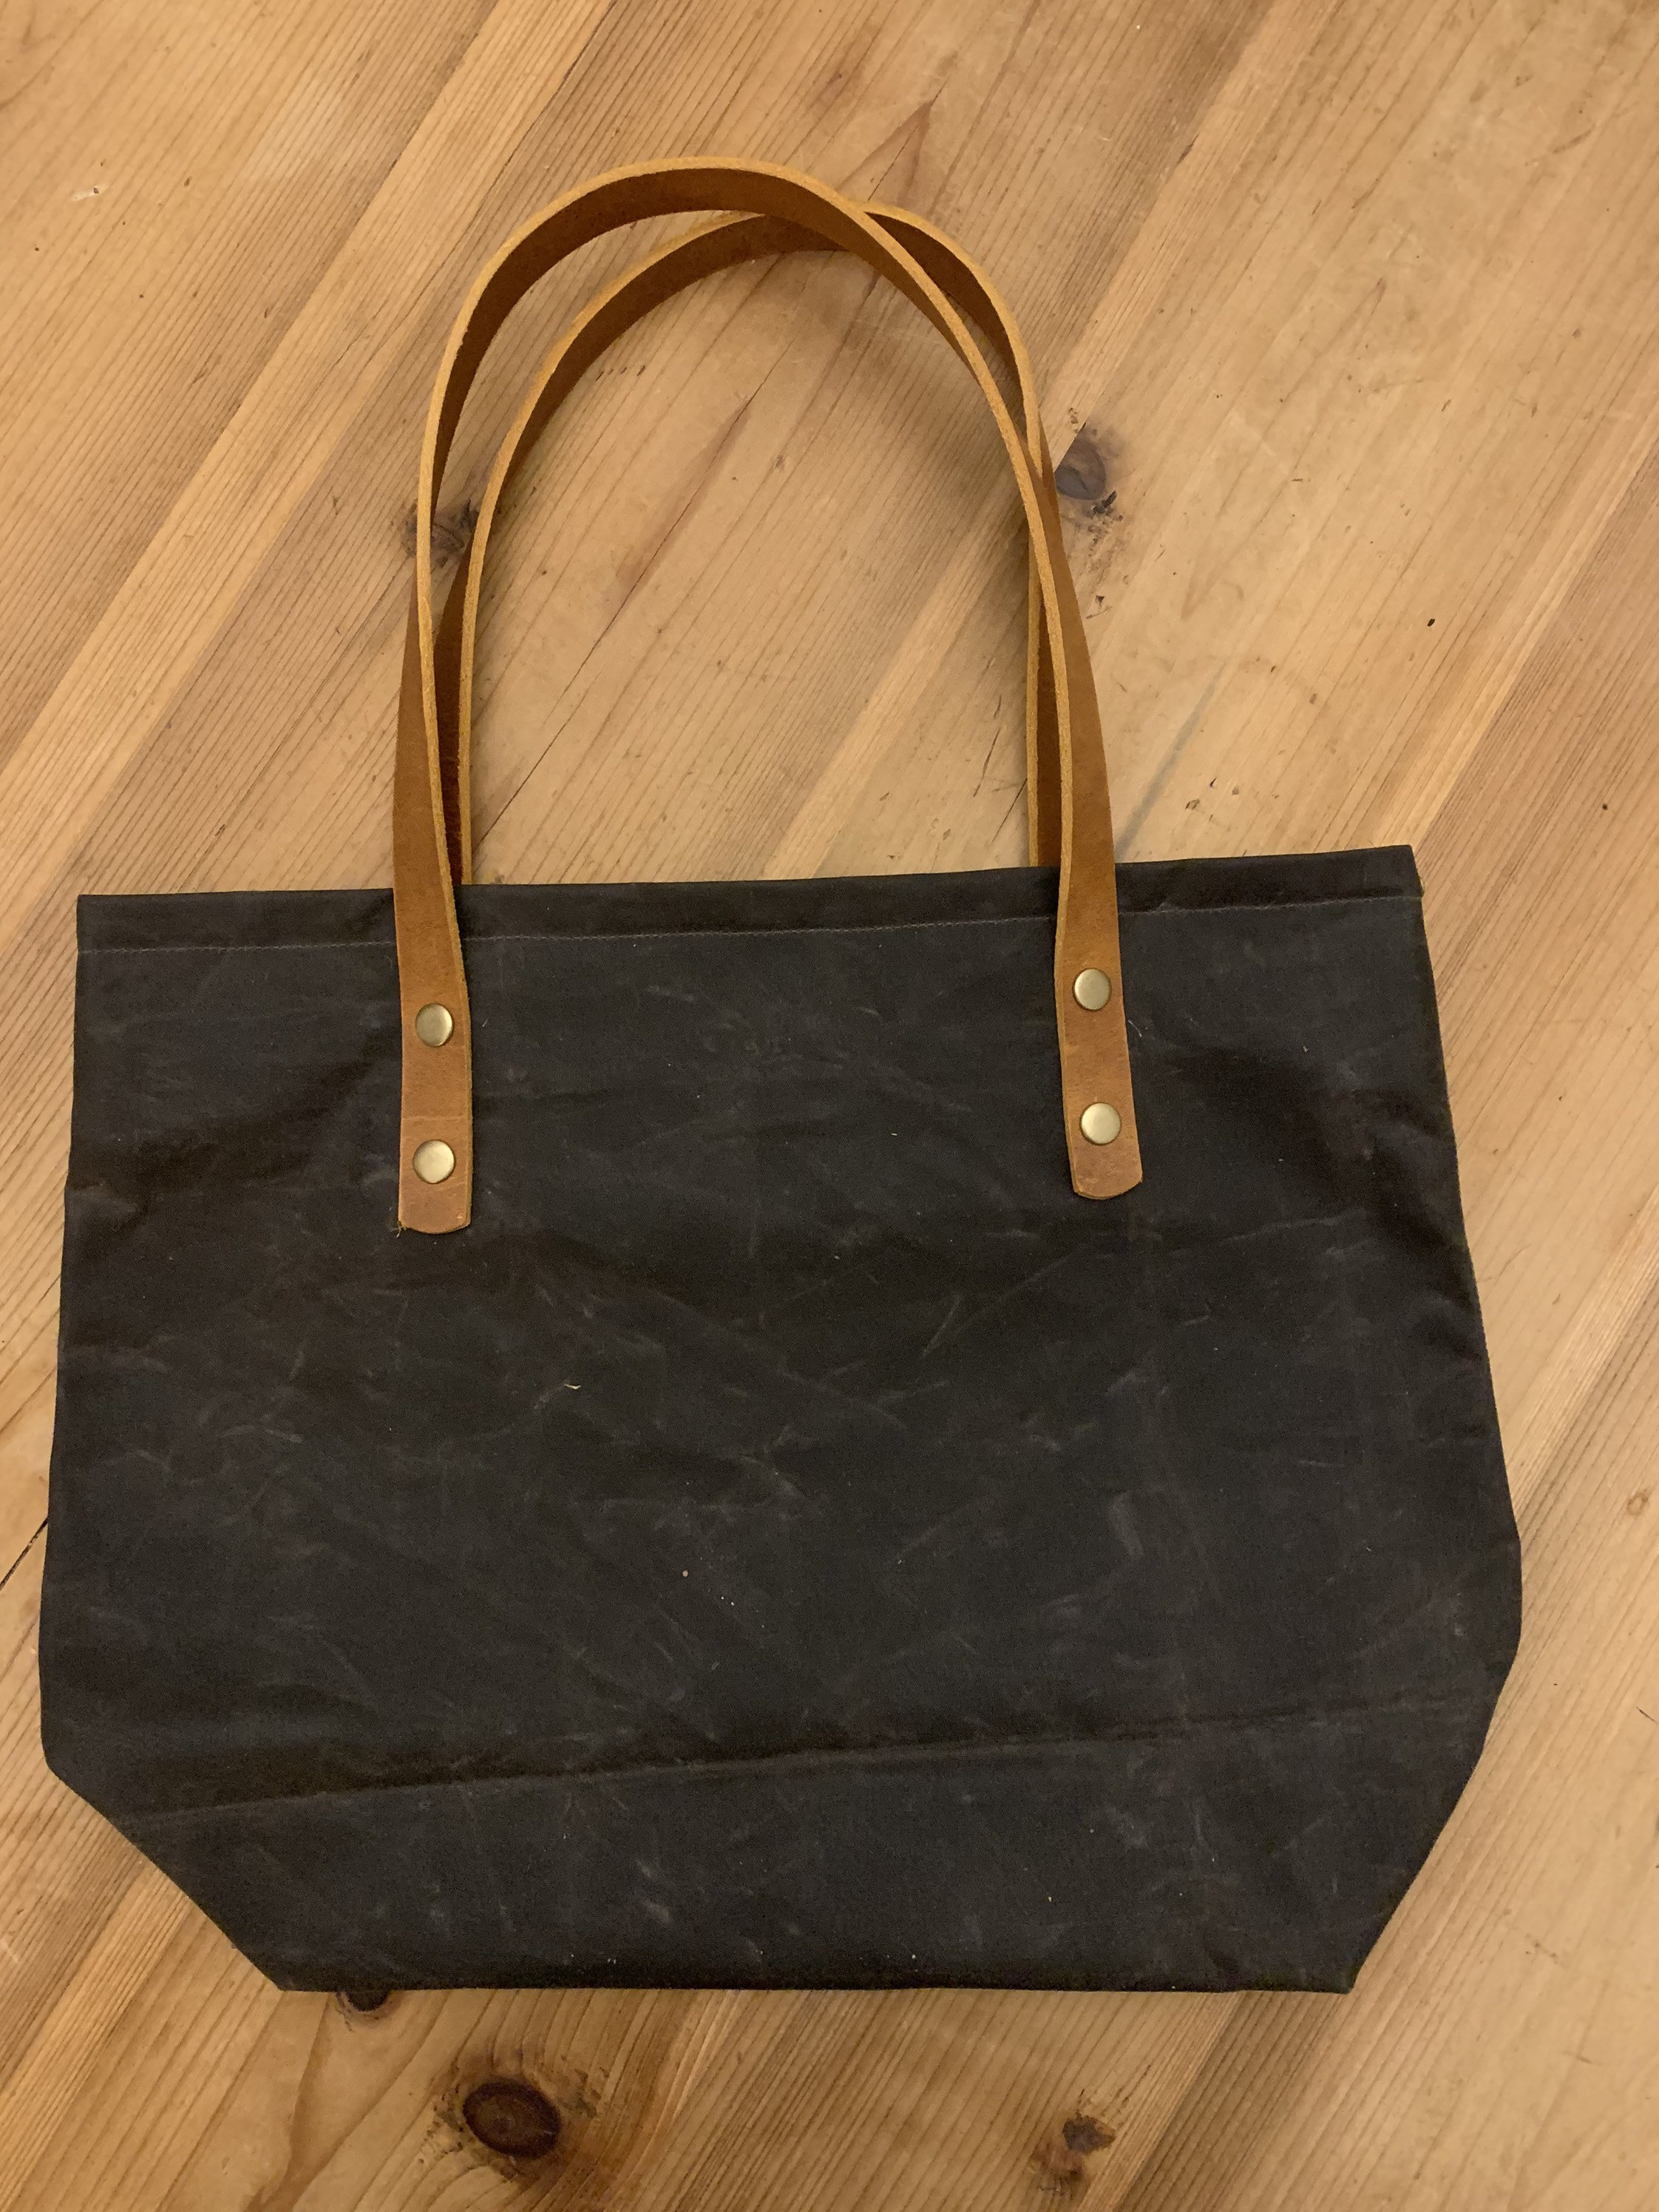 Rustic Black and Tan Oilskin waxed Cotton Bag with leather Tan handles/ work bag/ everyday a ...